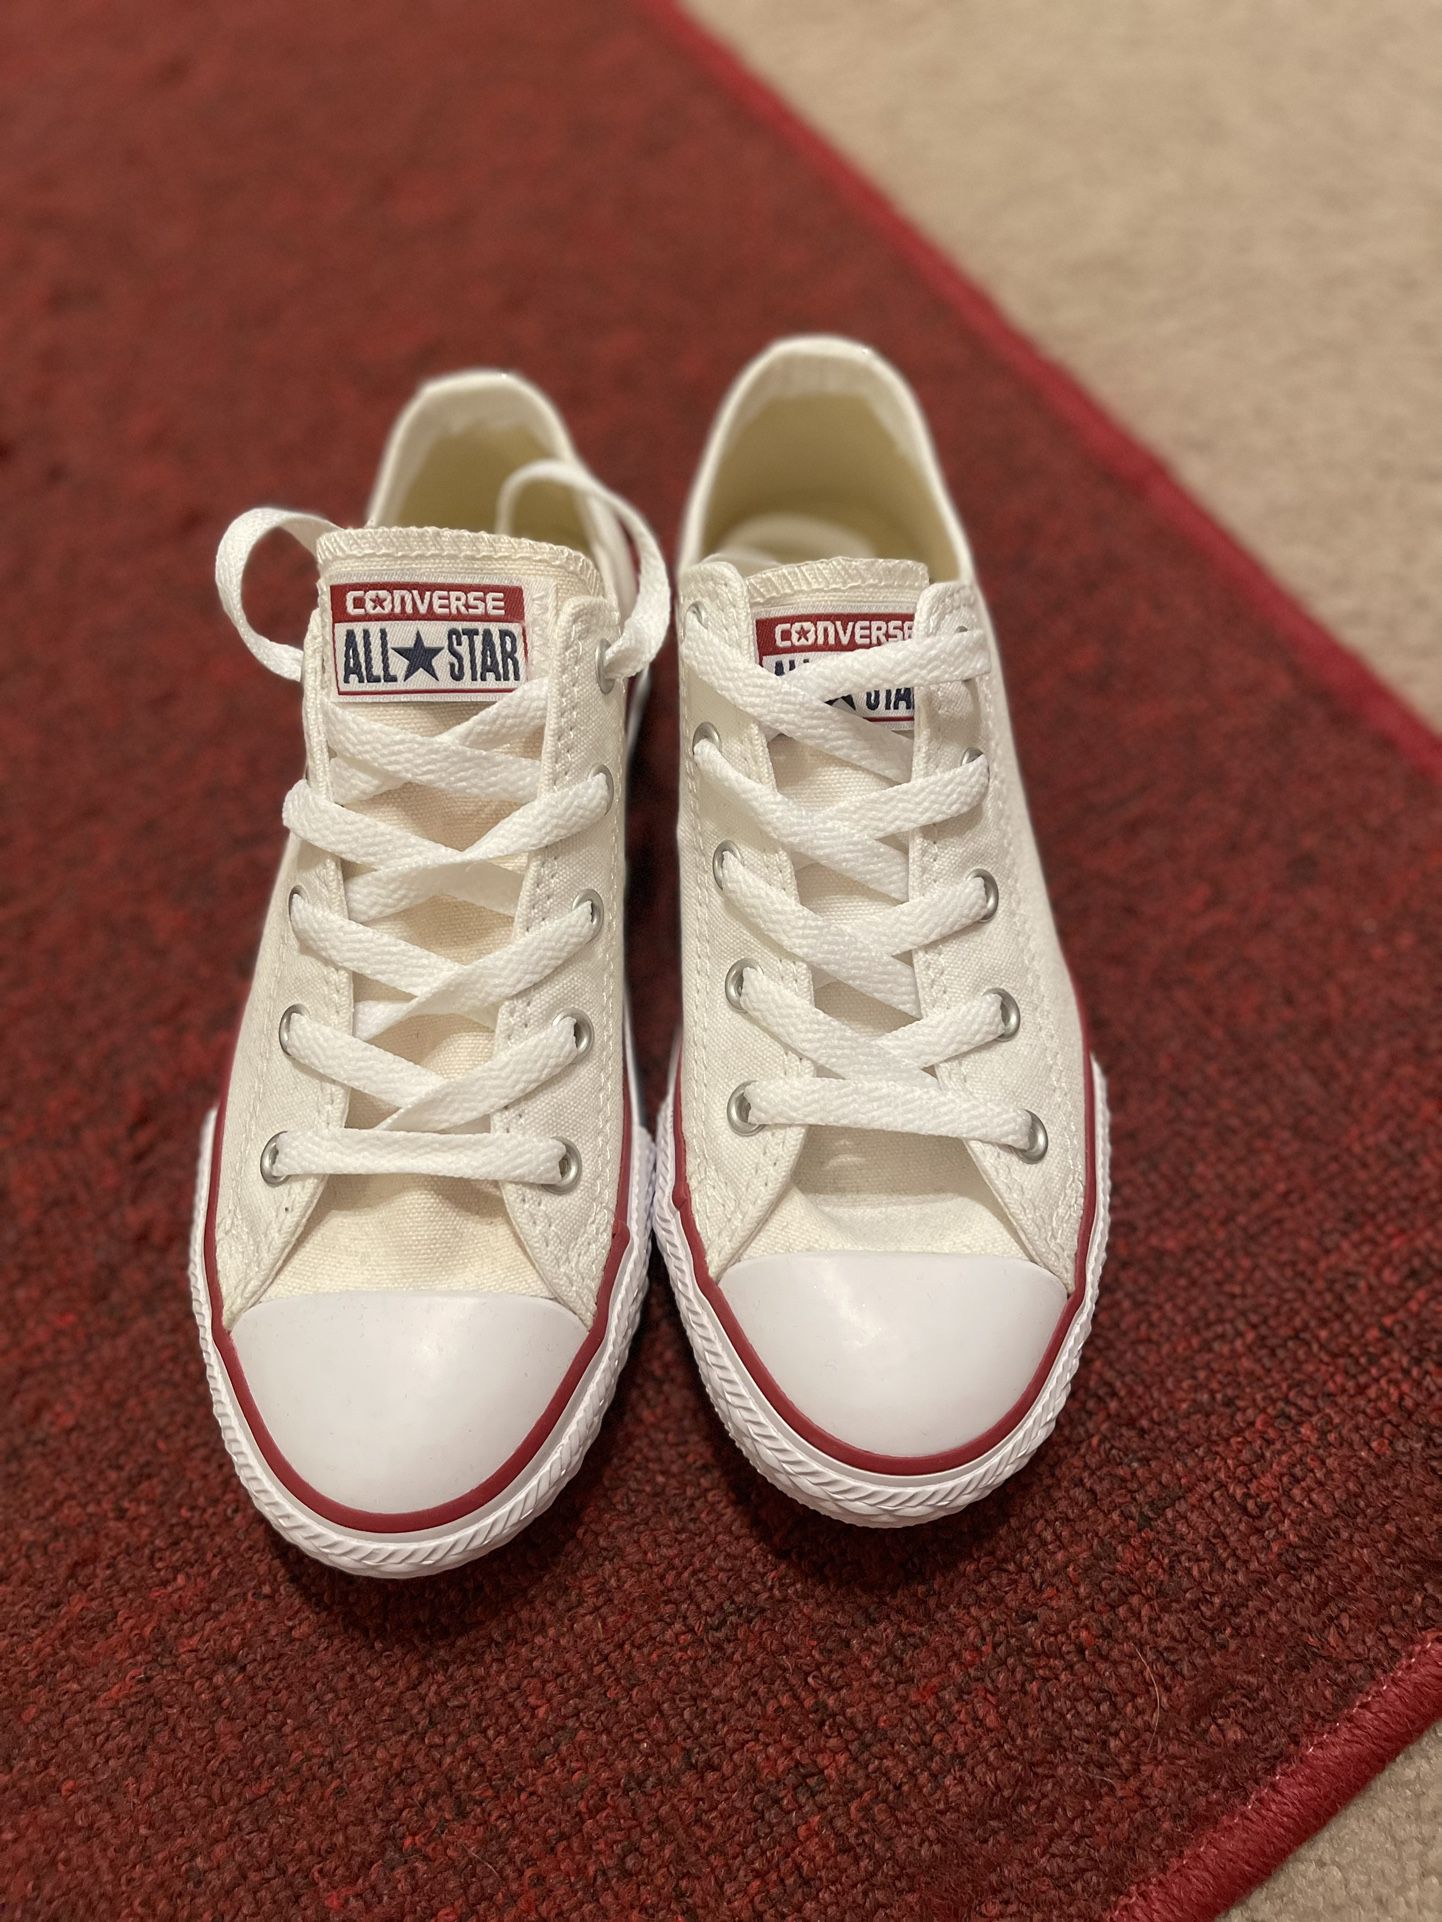 2 Pairs Of Kids Converse Shoes